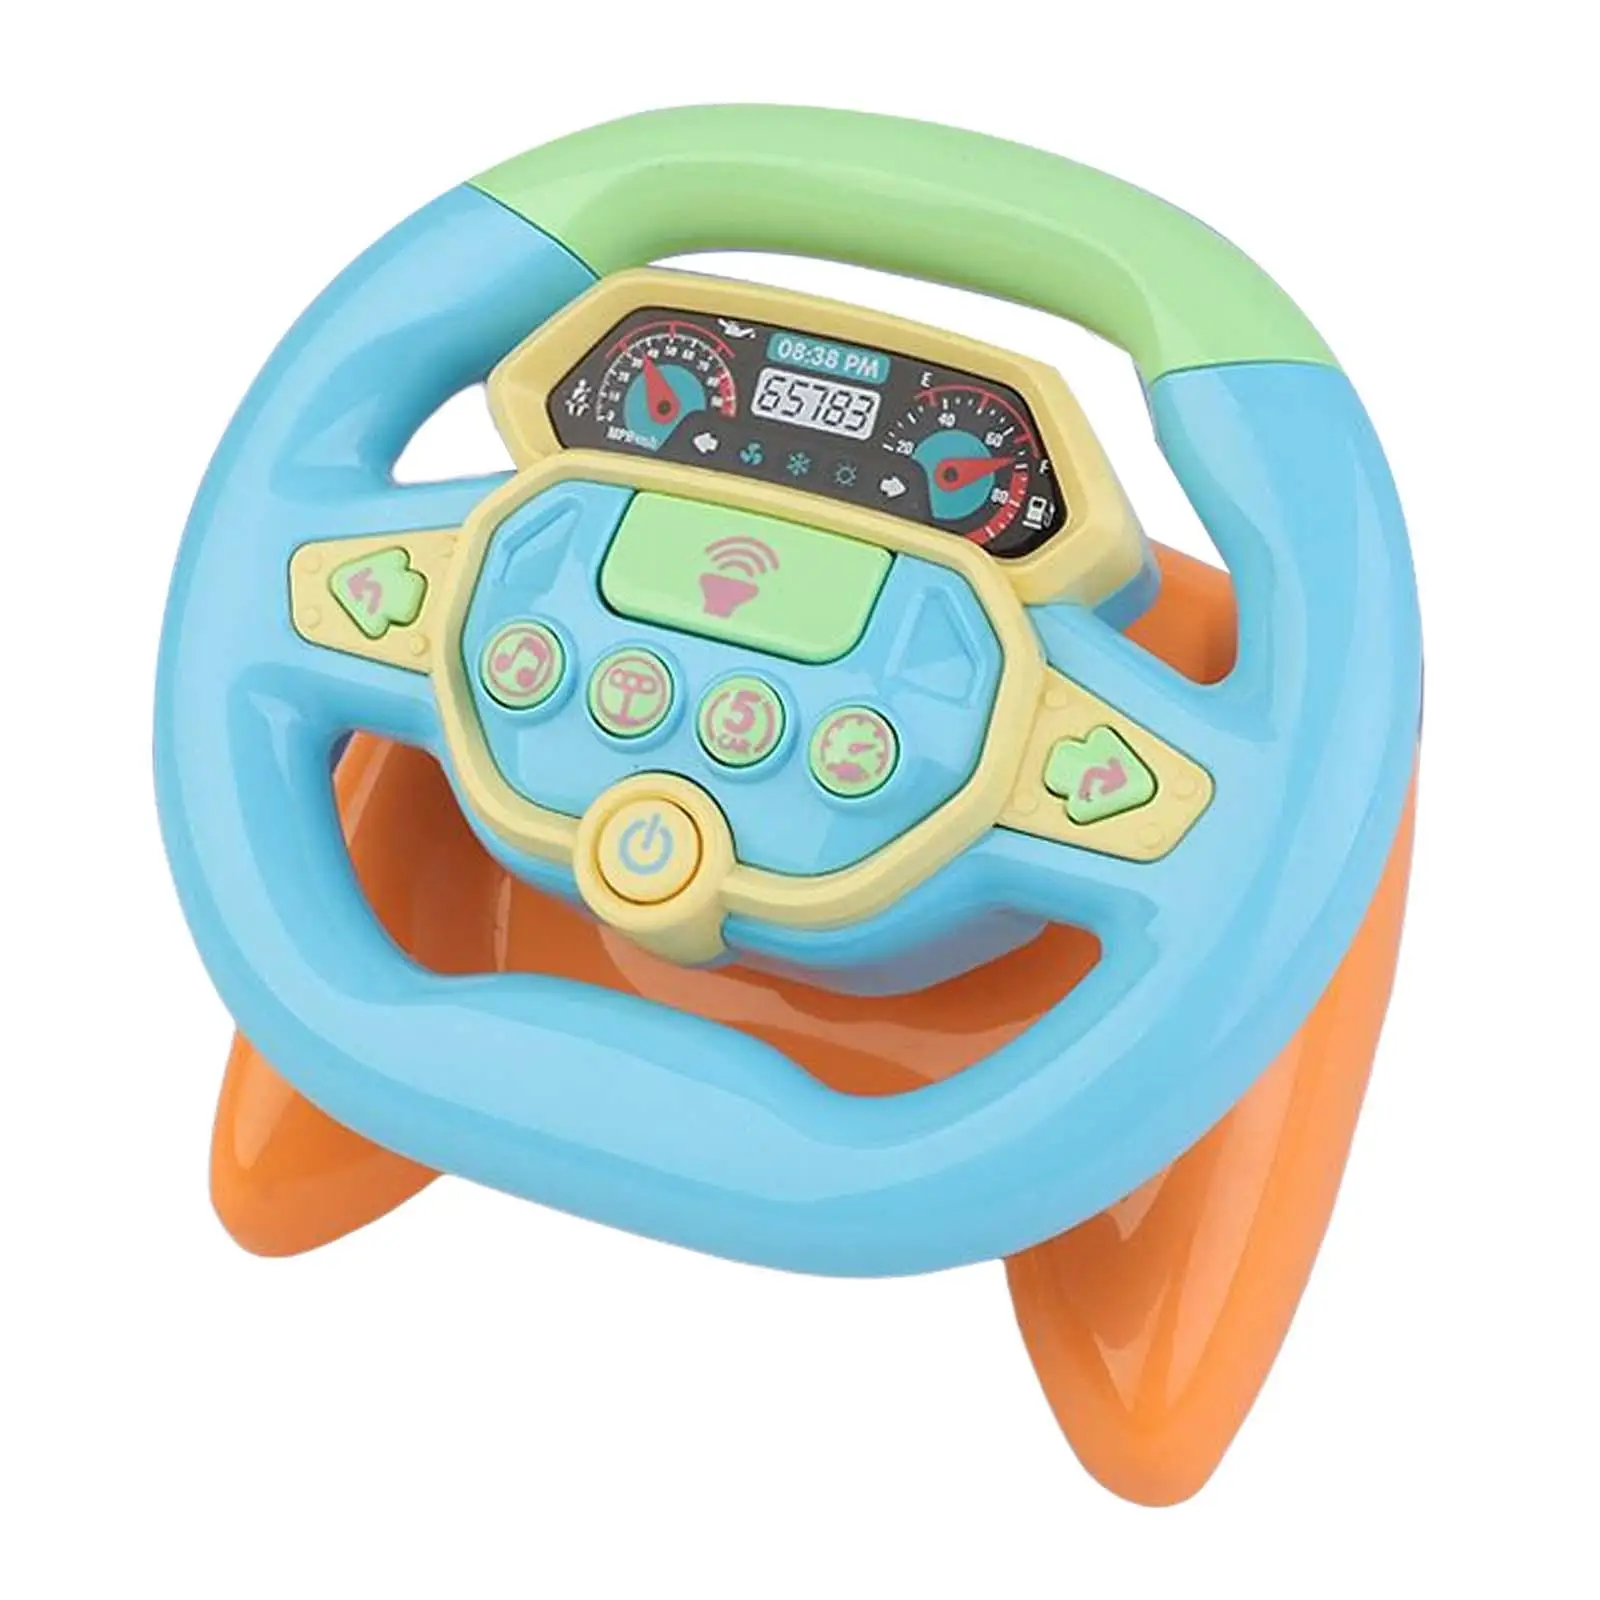 Rotating Simulated Driving Steering Wheel Toy, Early Learning Toys, Pretend to Drive, Girls, Birthday Gifts,